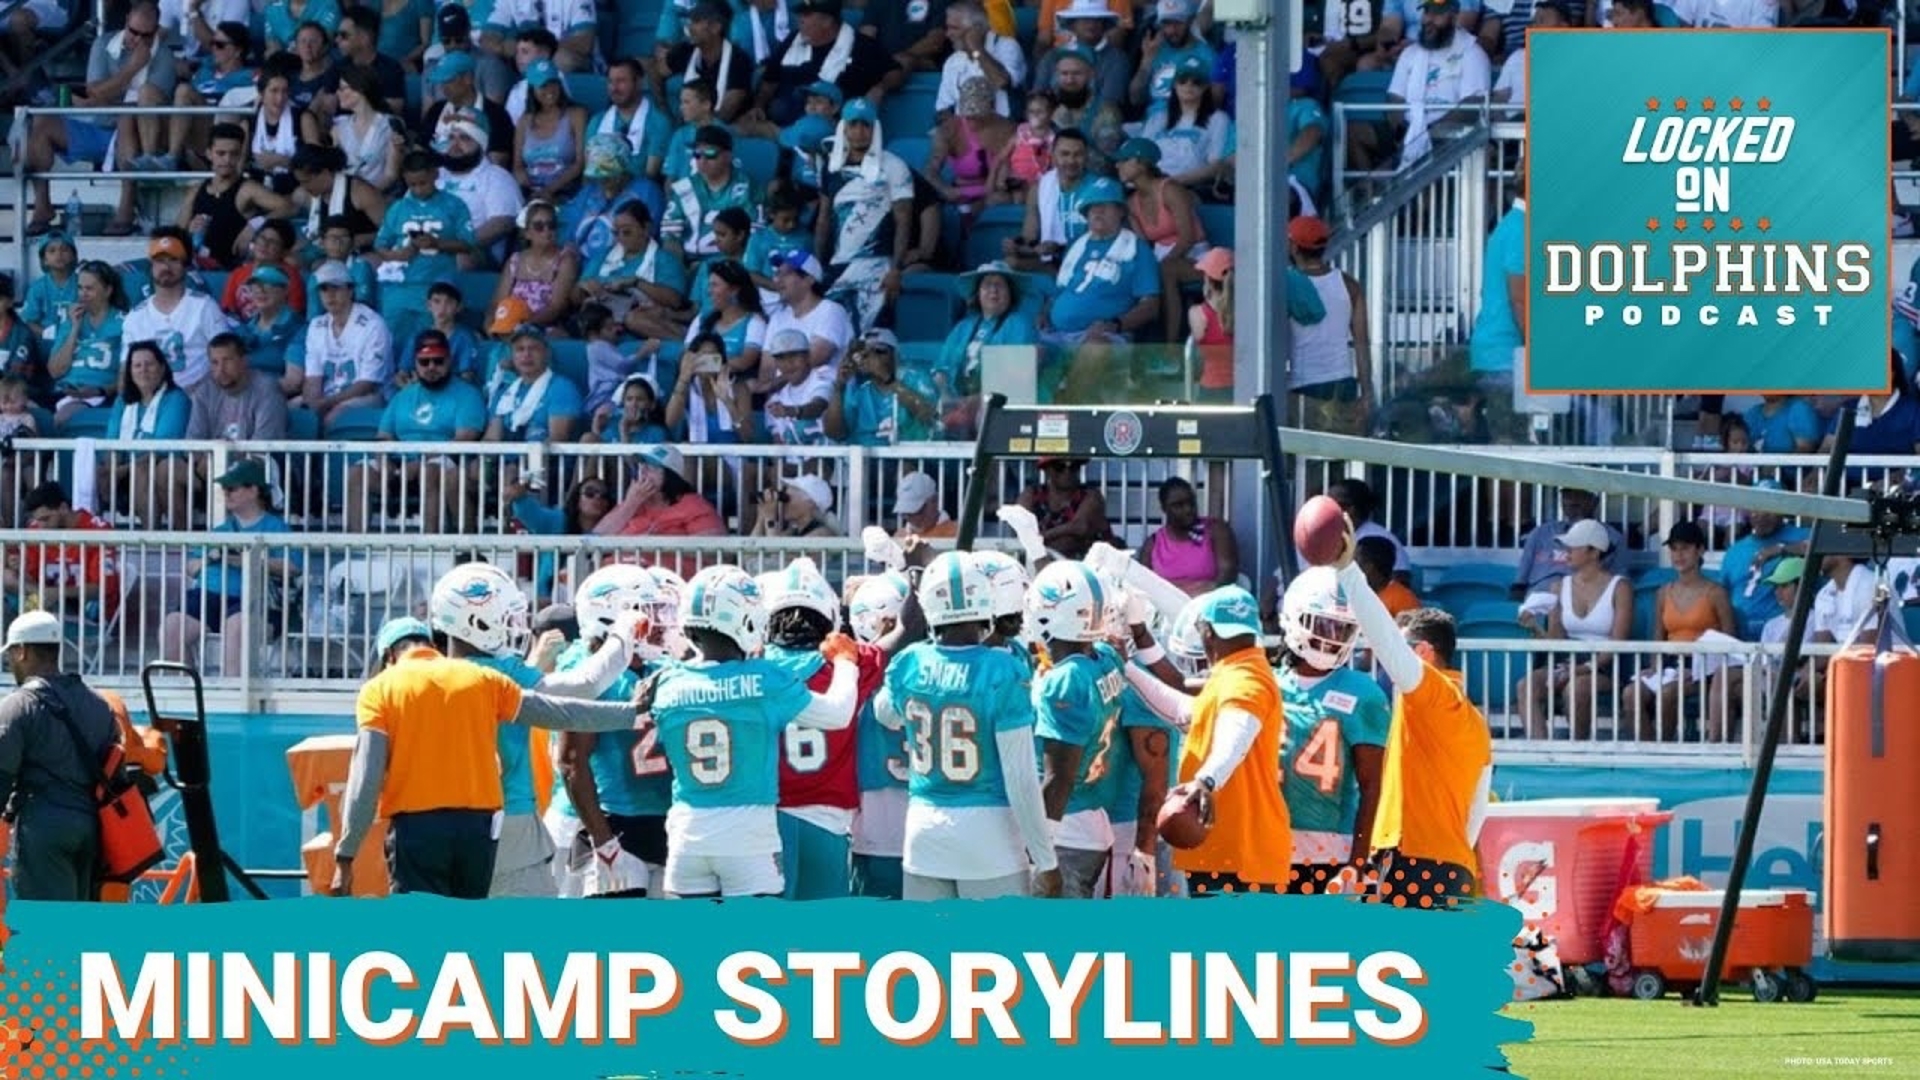 This week the Miami Dolphins will hold mandatory minicamp at the team's facility. What are the key storylines to watch?